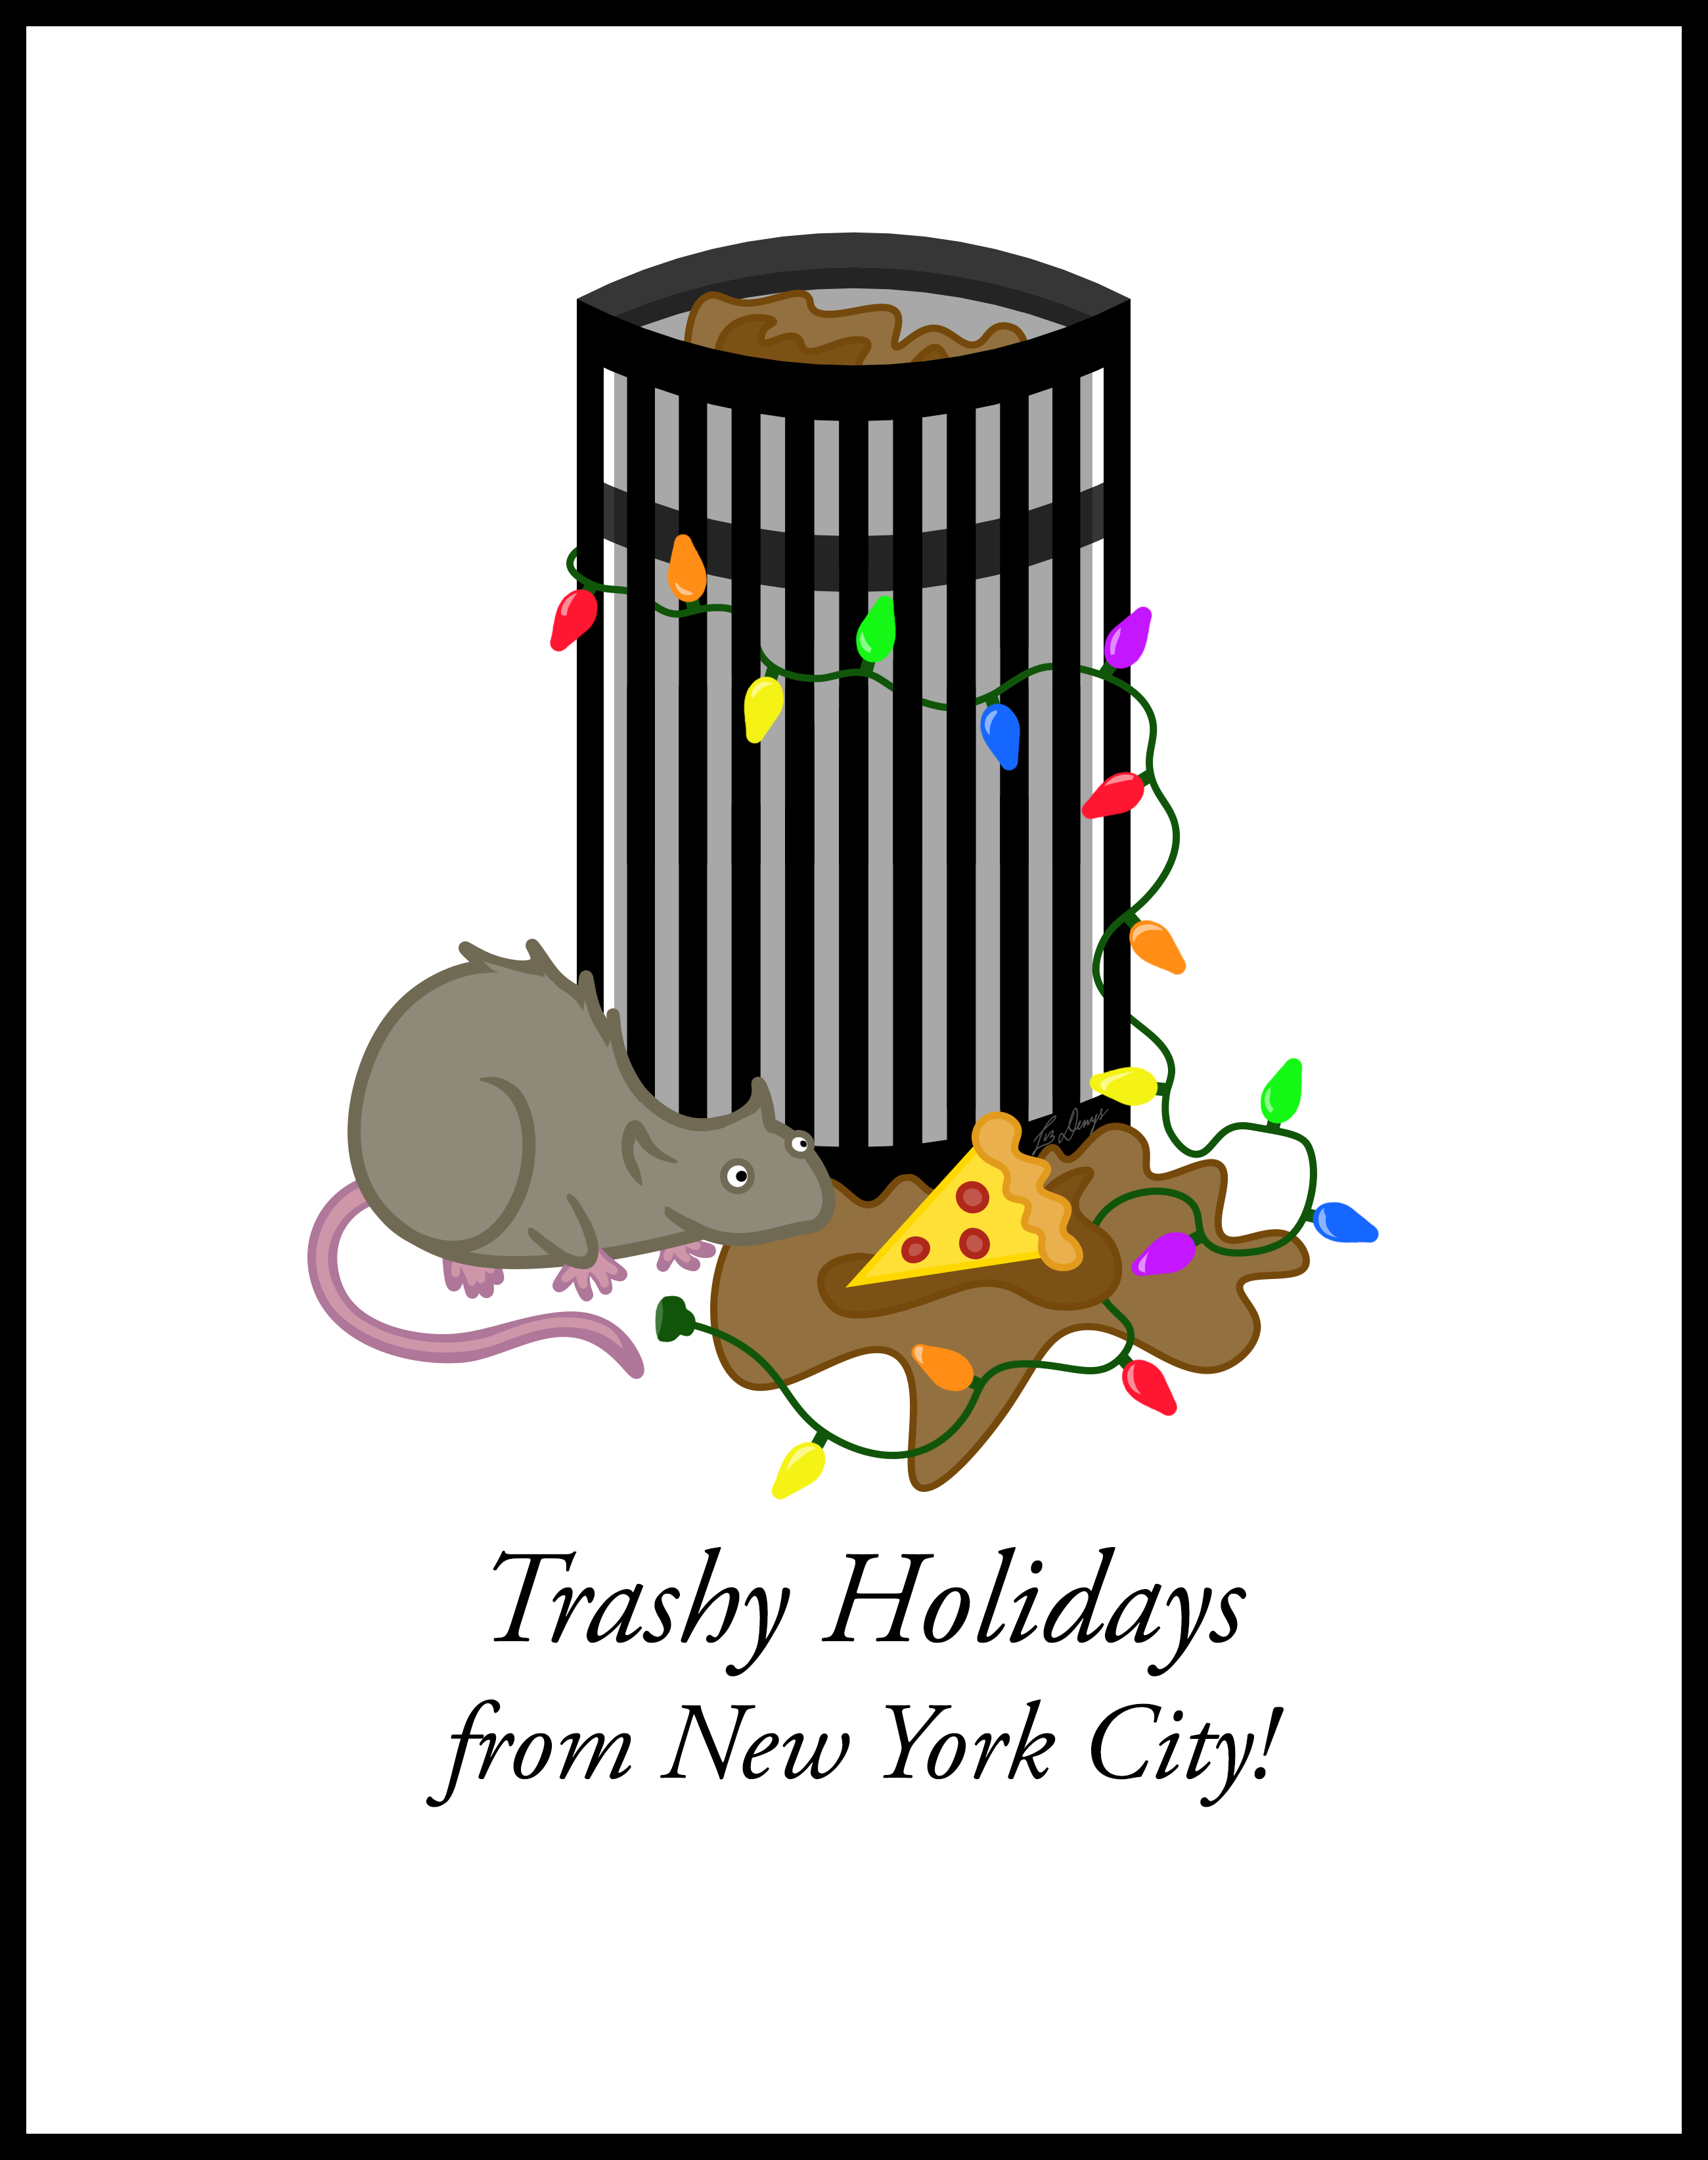 Cartoon-style holiday greeting card. A rat heads toward the feast of trash that's overflowing from a trash can. At the center of the overflowed trash is a slice of pepperoni pizza. The trash can has been decorated with a string of multicolored holiday lights. The greeting is: Trashy Holidays from New York City!